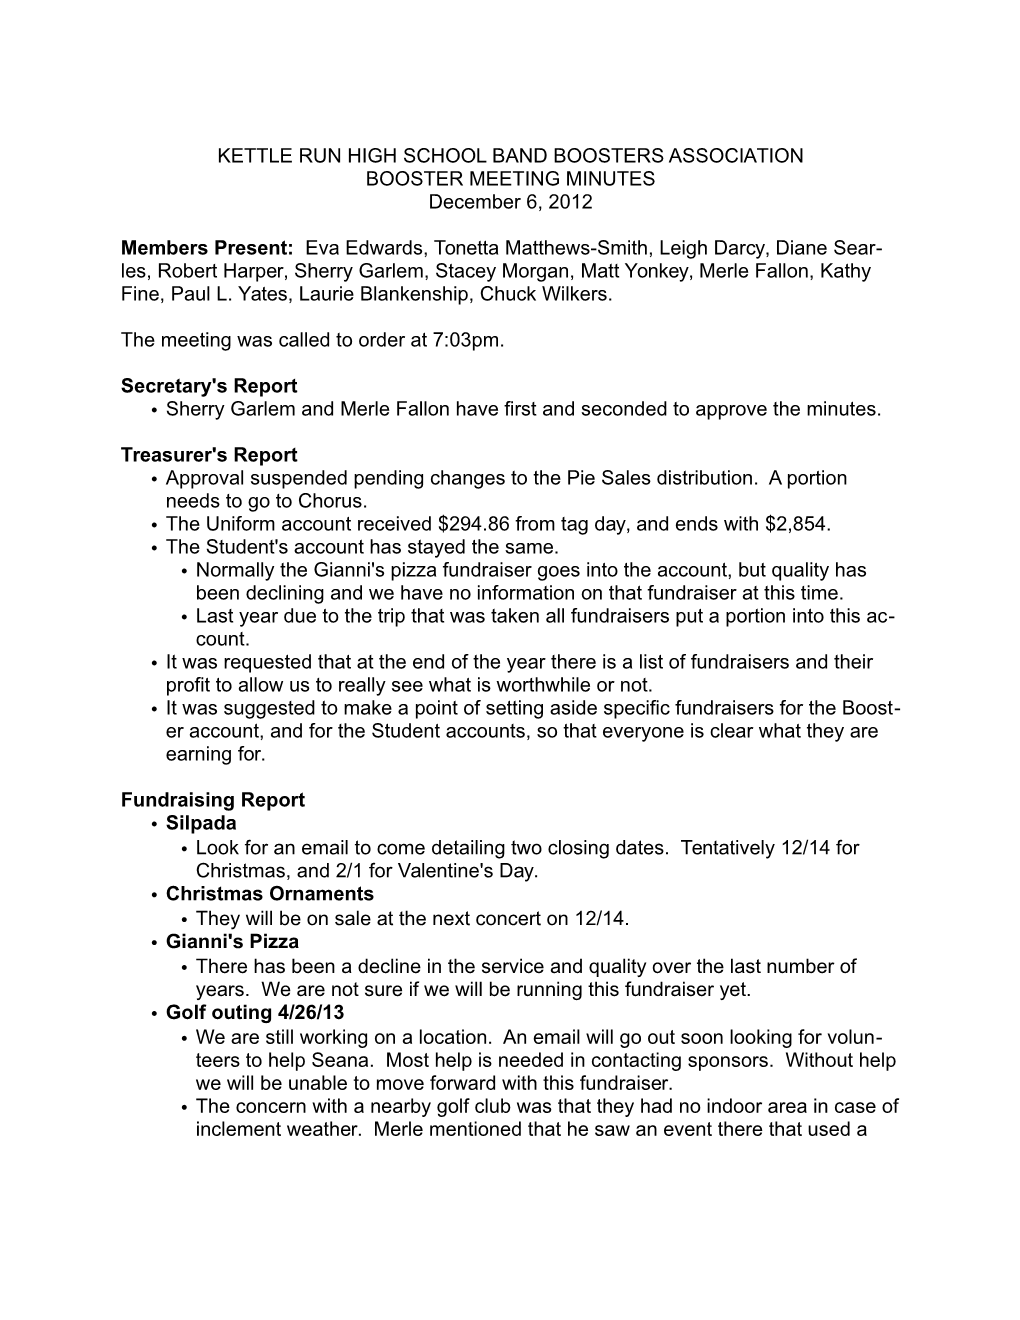 Booster Meeting Minutes 12/6/12